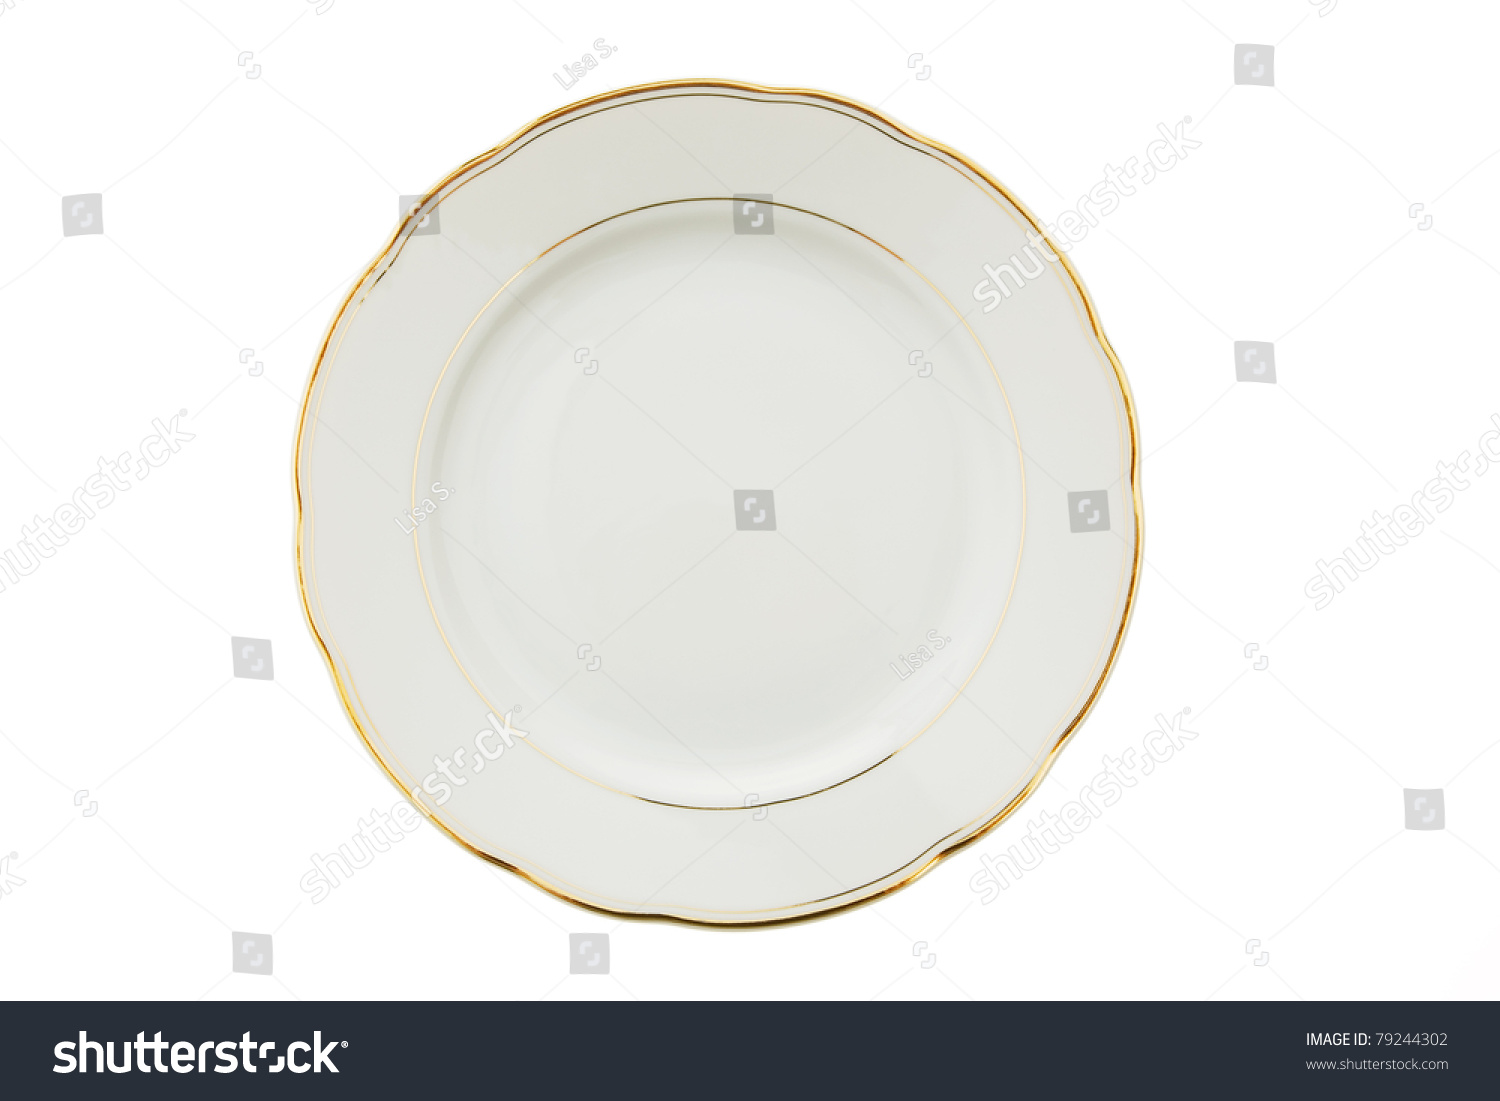 Plate. Place Setting For A Dinner In The Restaurant. Stock Photo